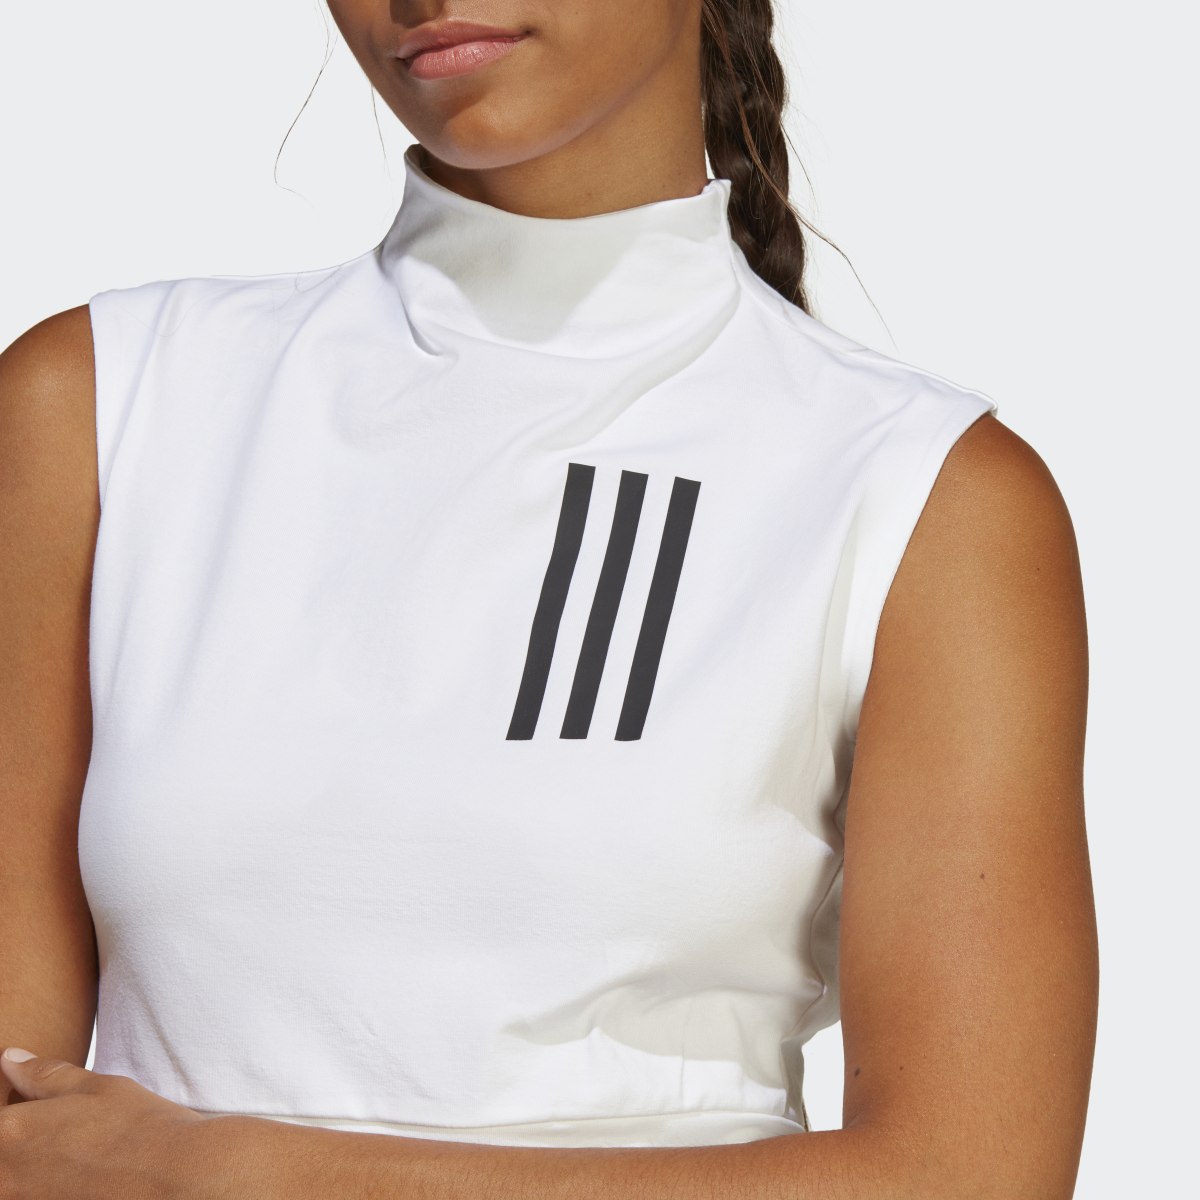 Adidas Mission Victory Sleeveless Crop-Top. 6